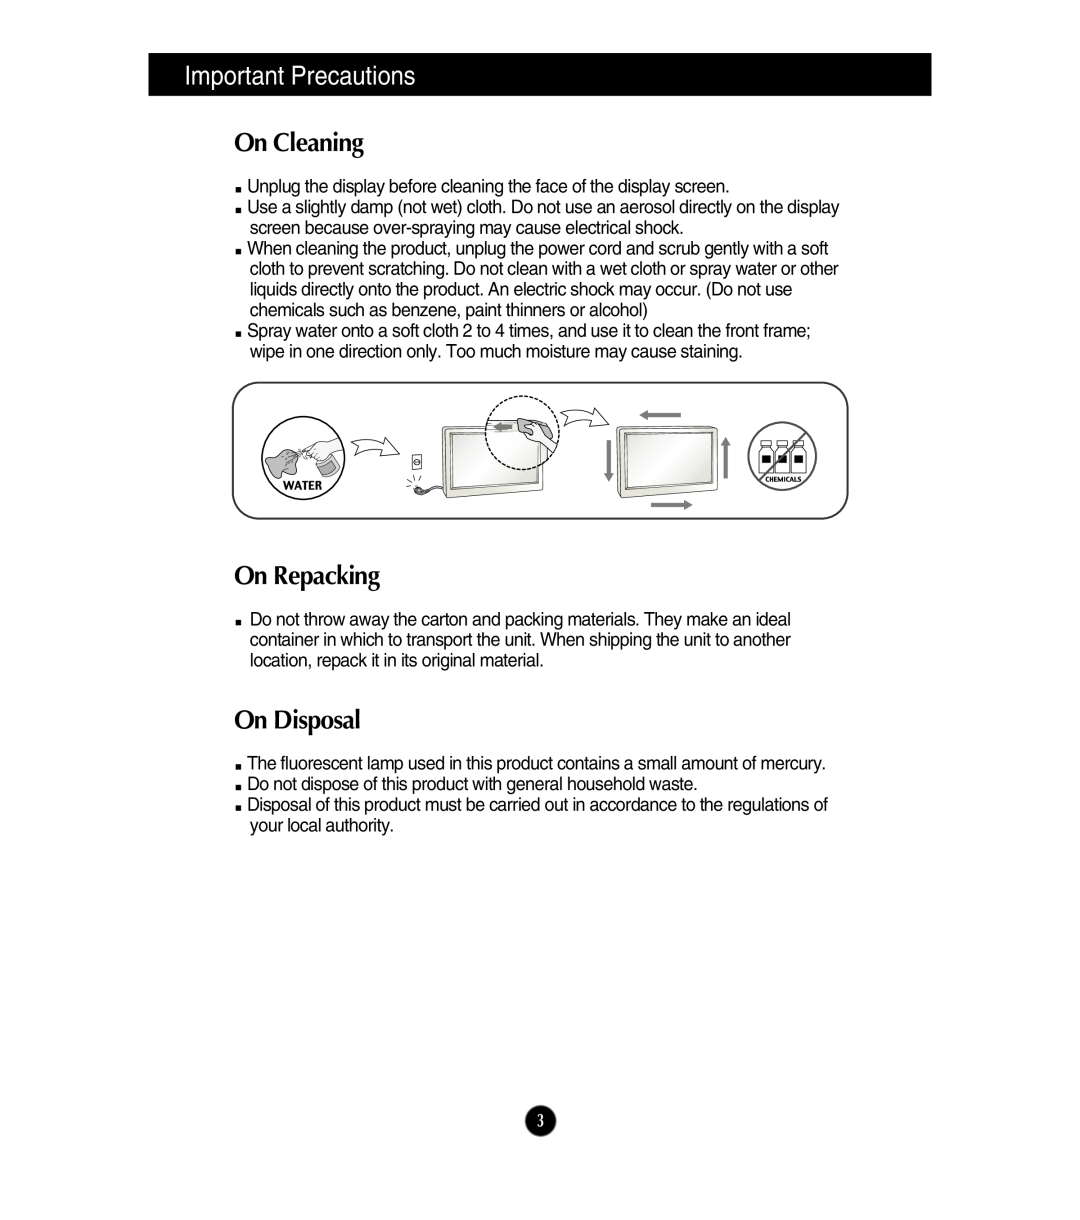 LG Electronics E2210S, E1910T, E1910S, E2210T owner manual On Cleaning, On Repacking, On Disposal, Important Precautions 